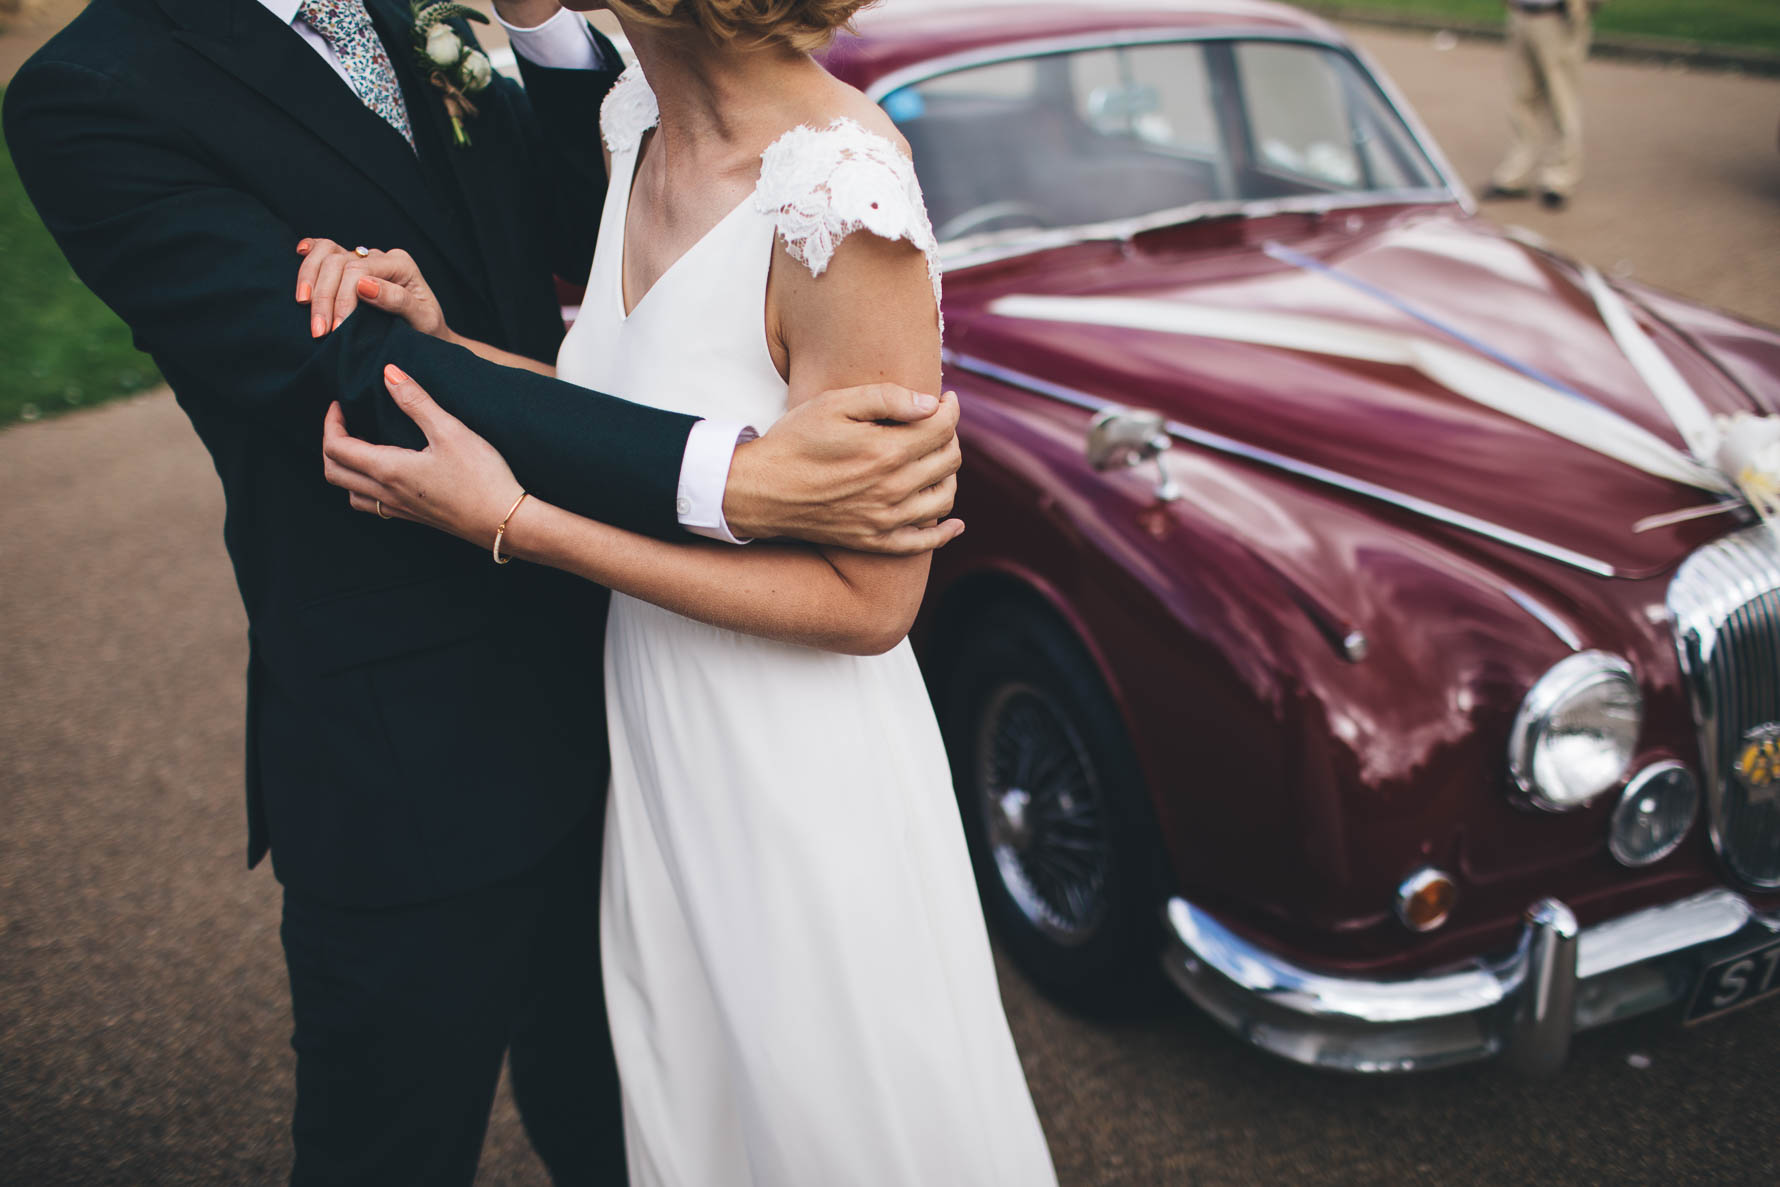 Bride and groom with their faces out of shot with their arms intertwined stood in front of a red vintage car